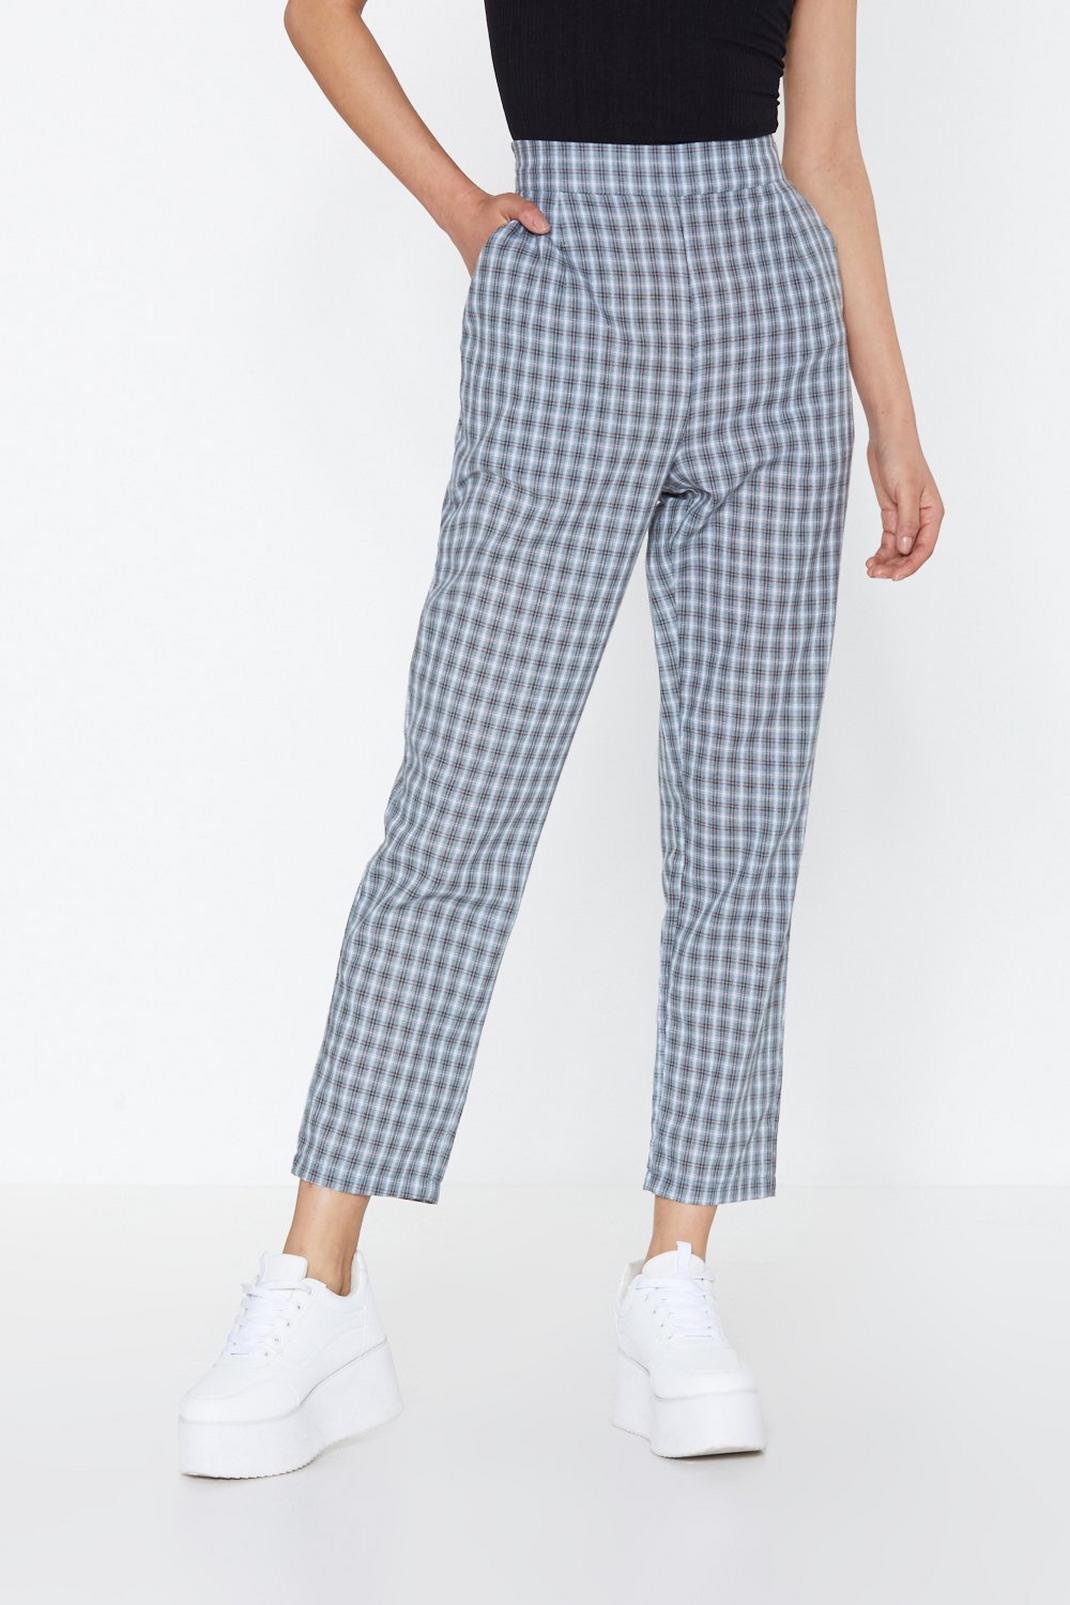 My Check of the Woods Tapered Pants | Nasty Gal